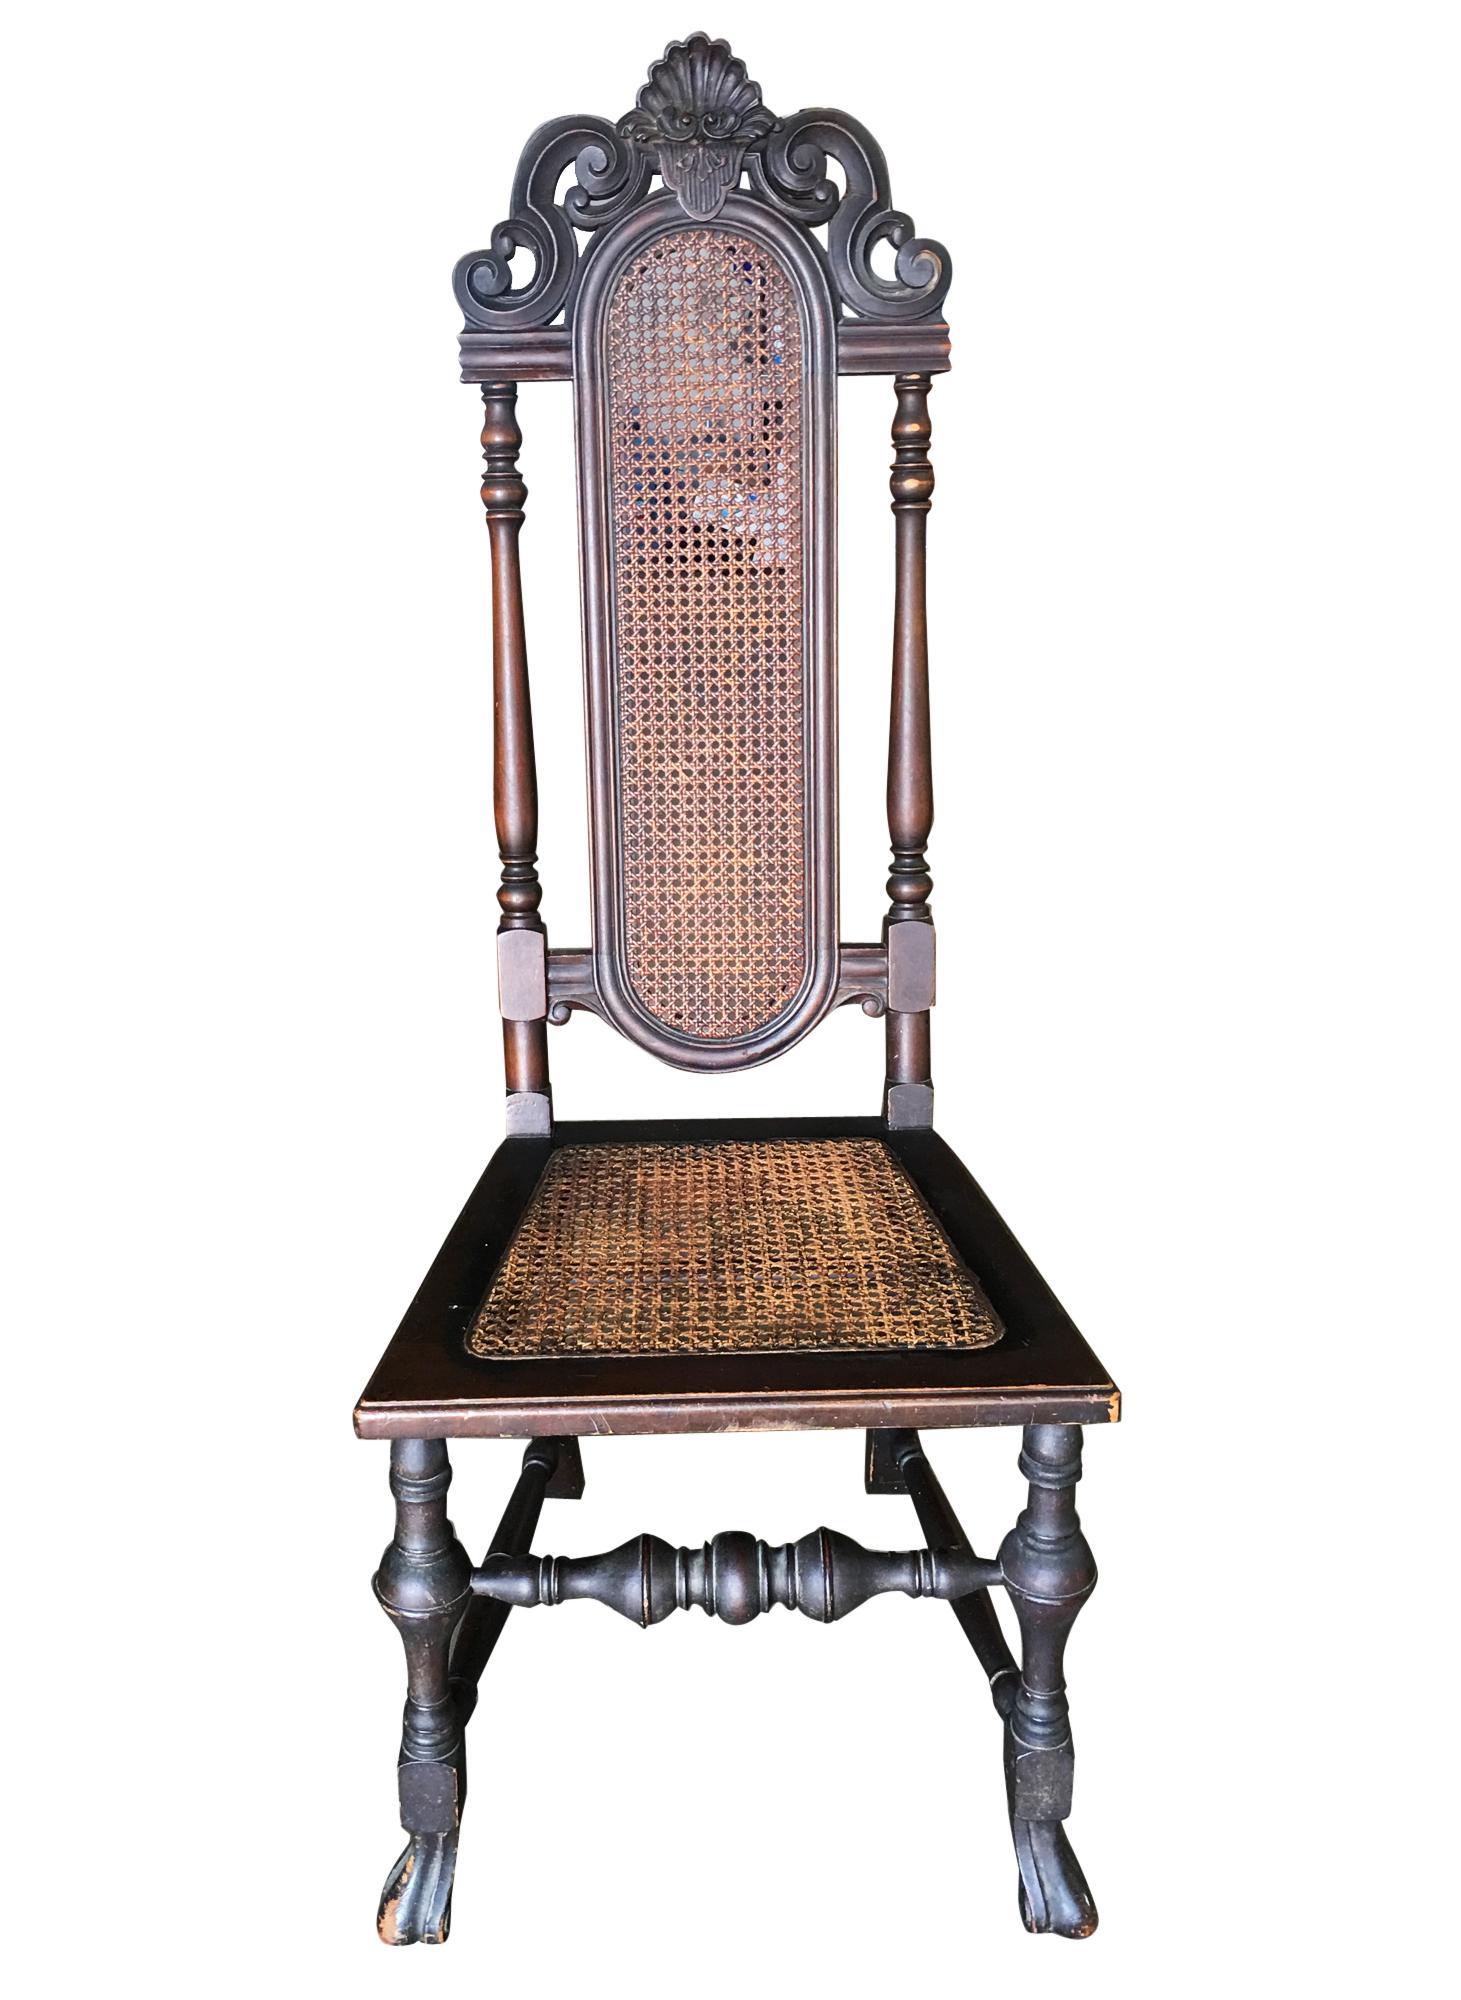 Victorian hand carved oak Gothic Revival side throne chair with woven cane wicker back and seat,
circa 1860.